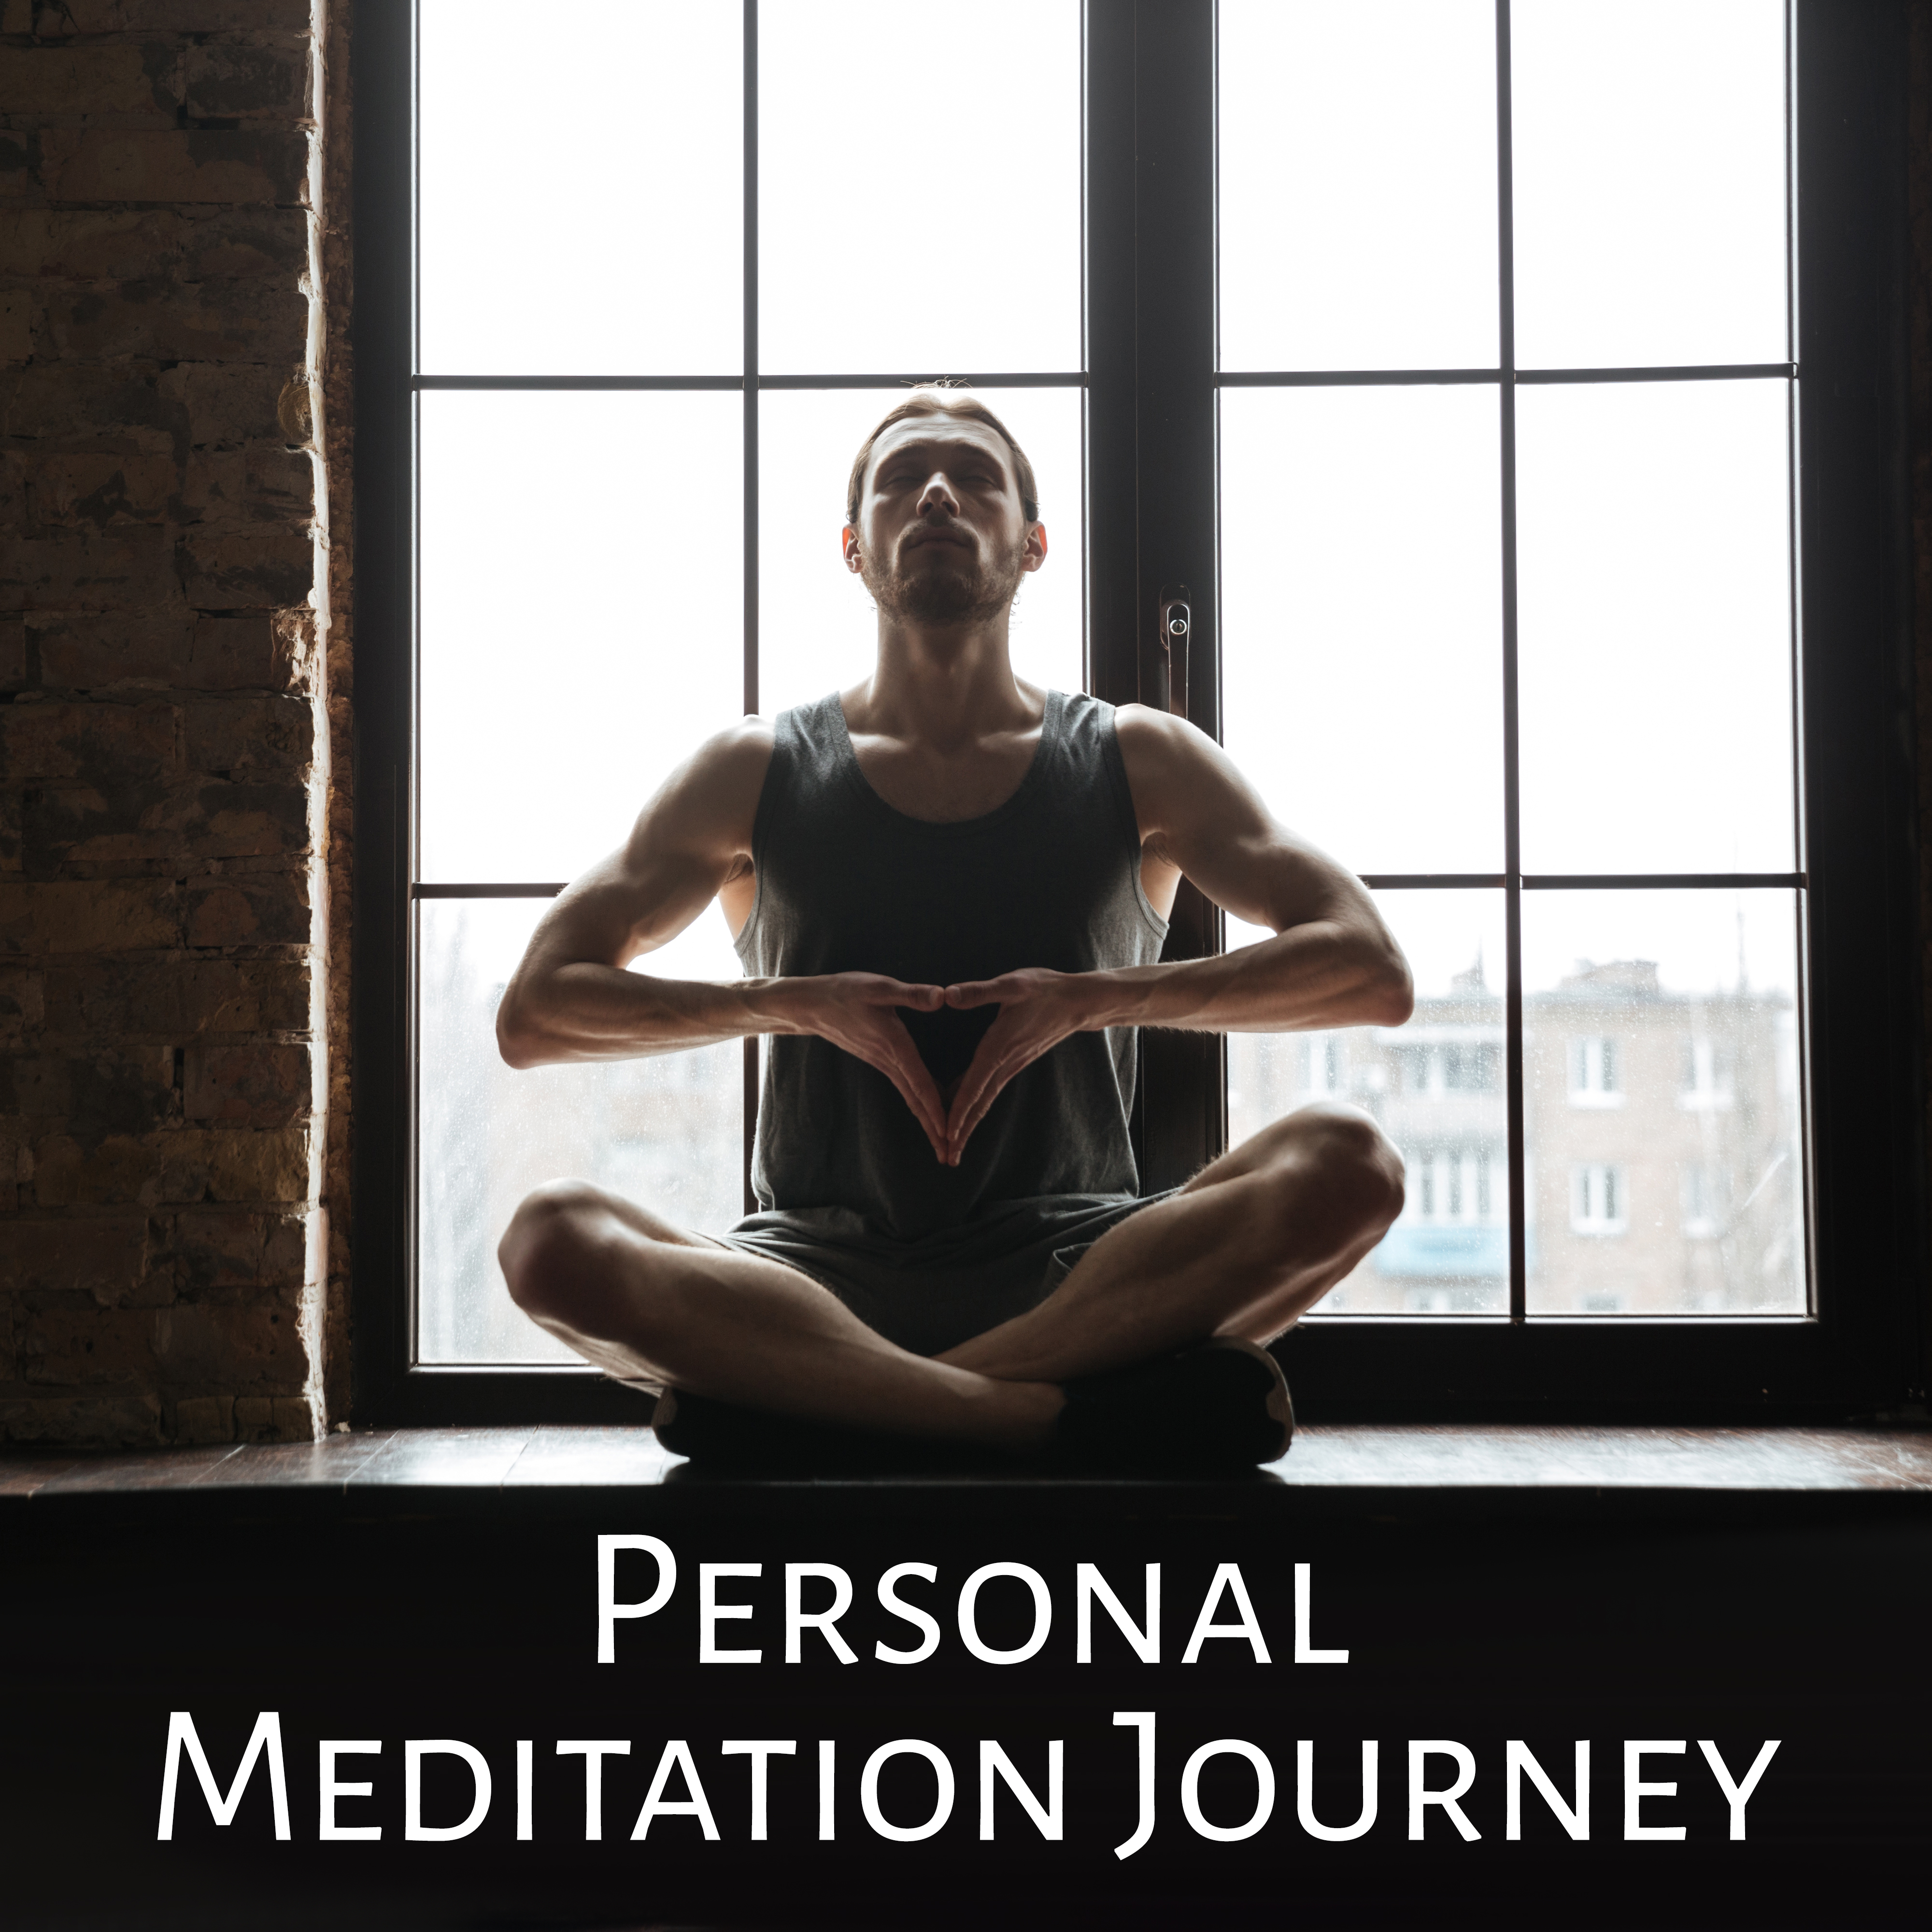 Personal Meditation Journey  New Age Music Compilation for Yoga, Relax, Spa, Songs with Irish Sounds